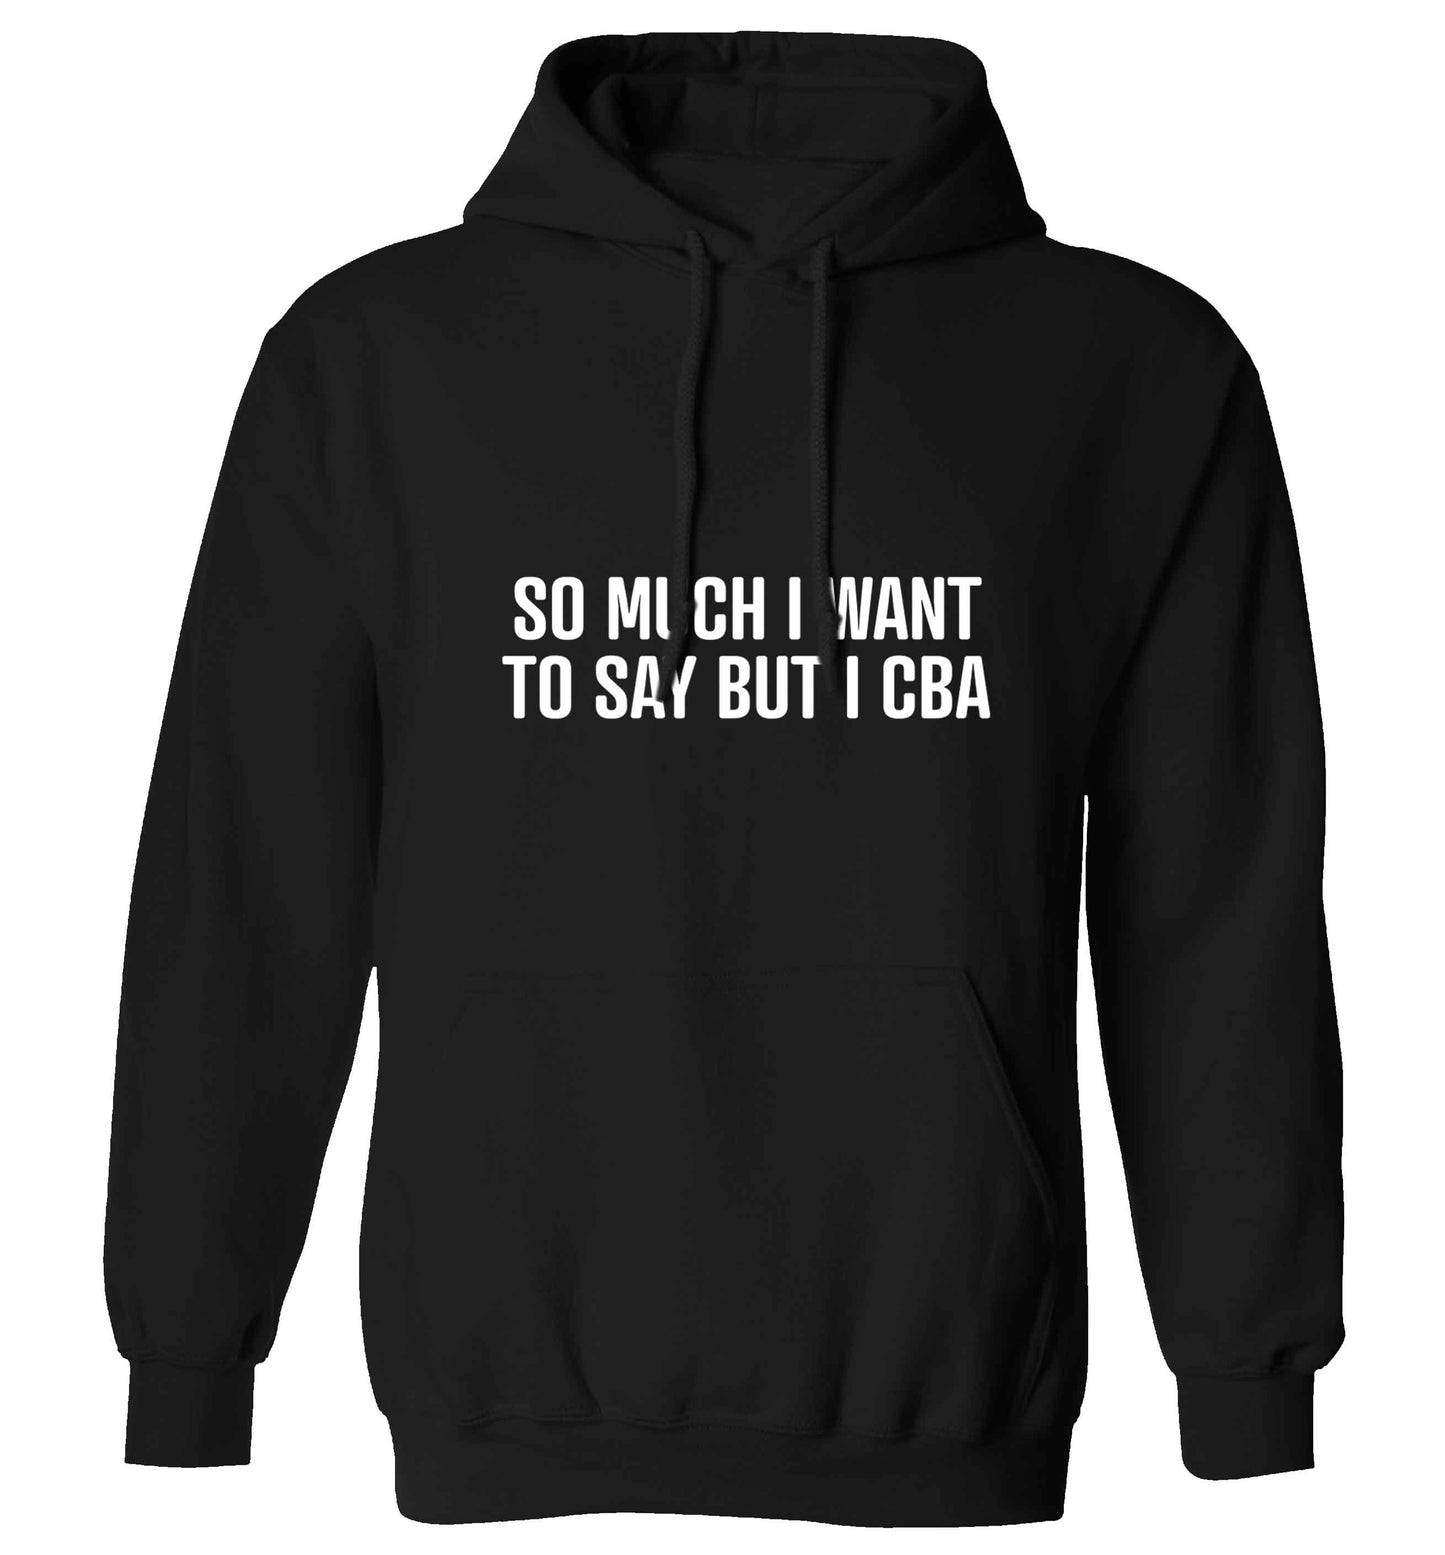 So much I want to say I cba  adults unisex black hoodie 2XL